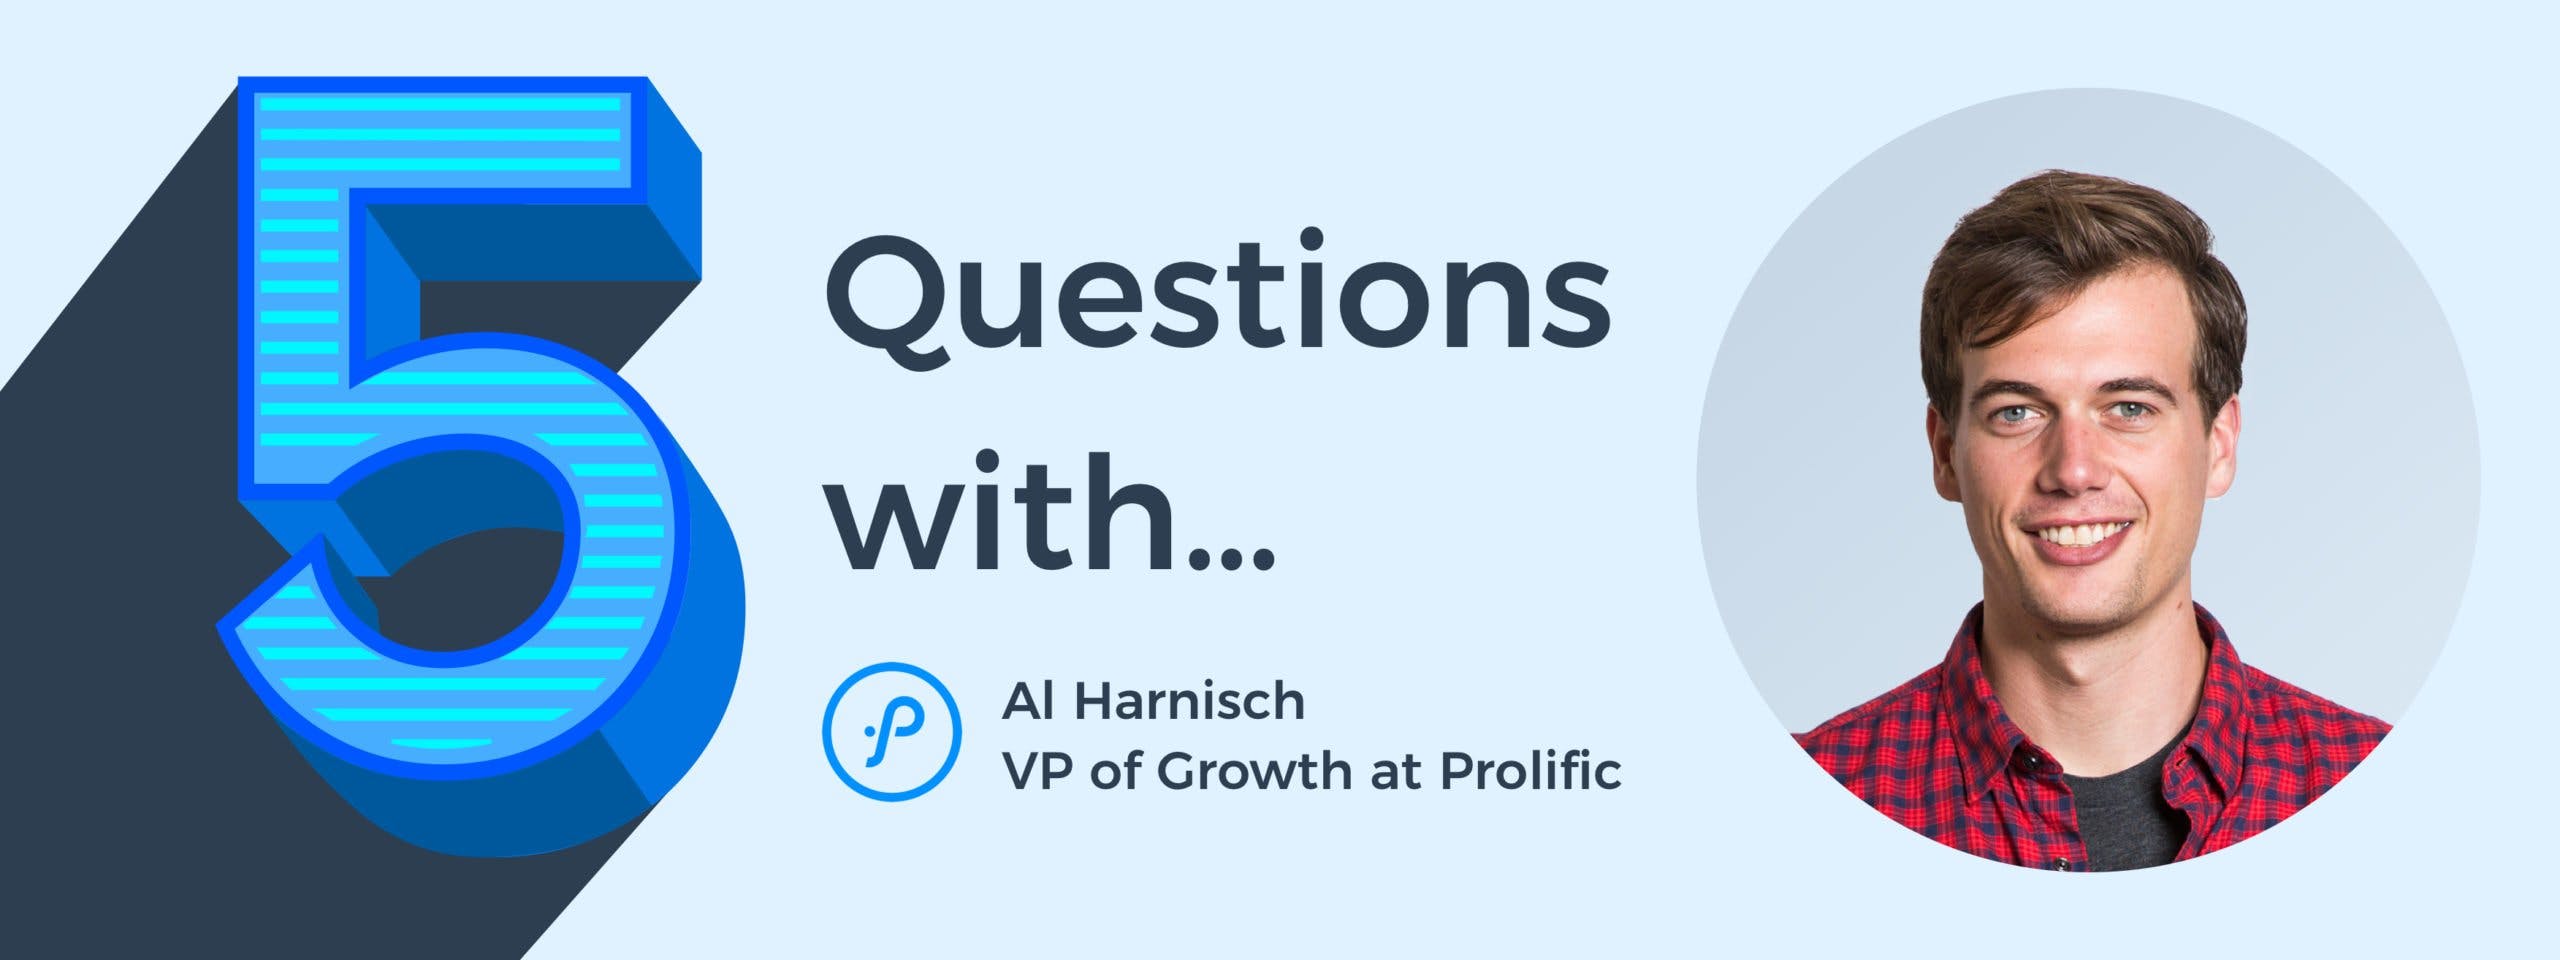 5 Questions with Al Harnisch, VP of Growth at Prolific Interactive